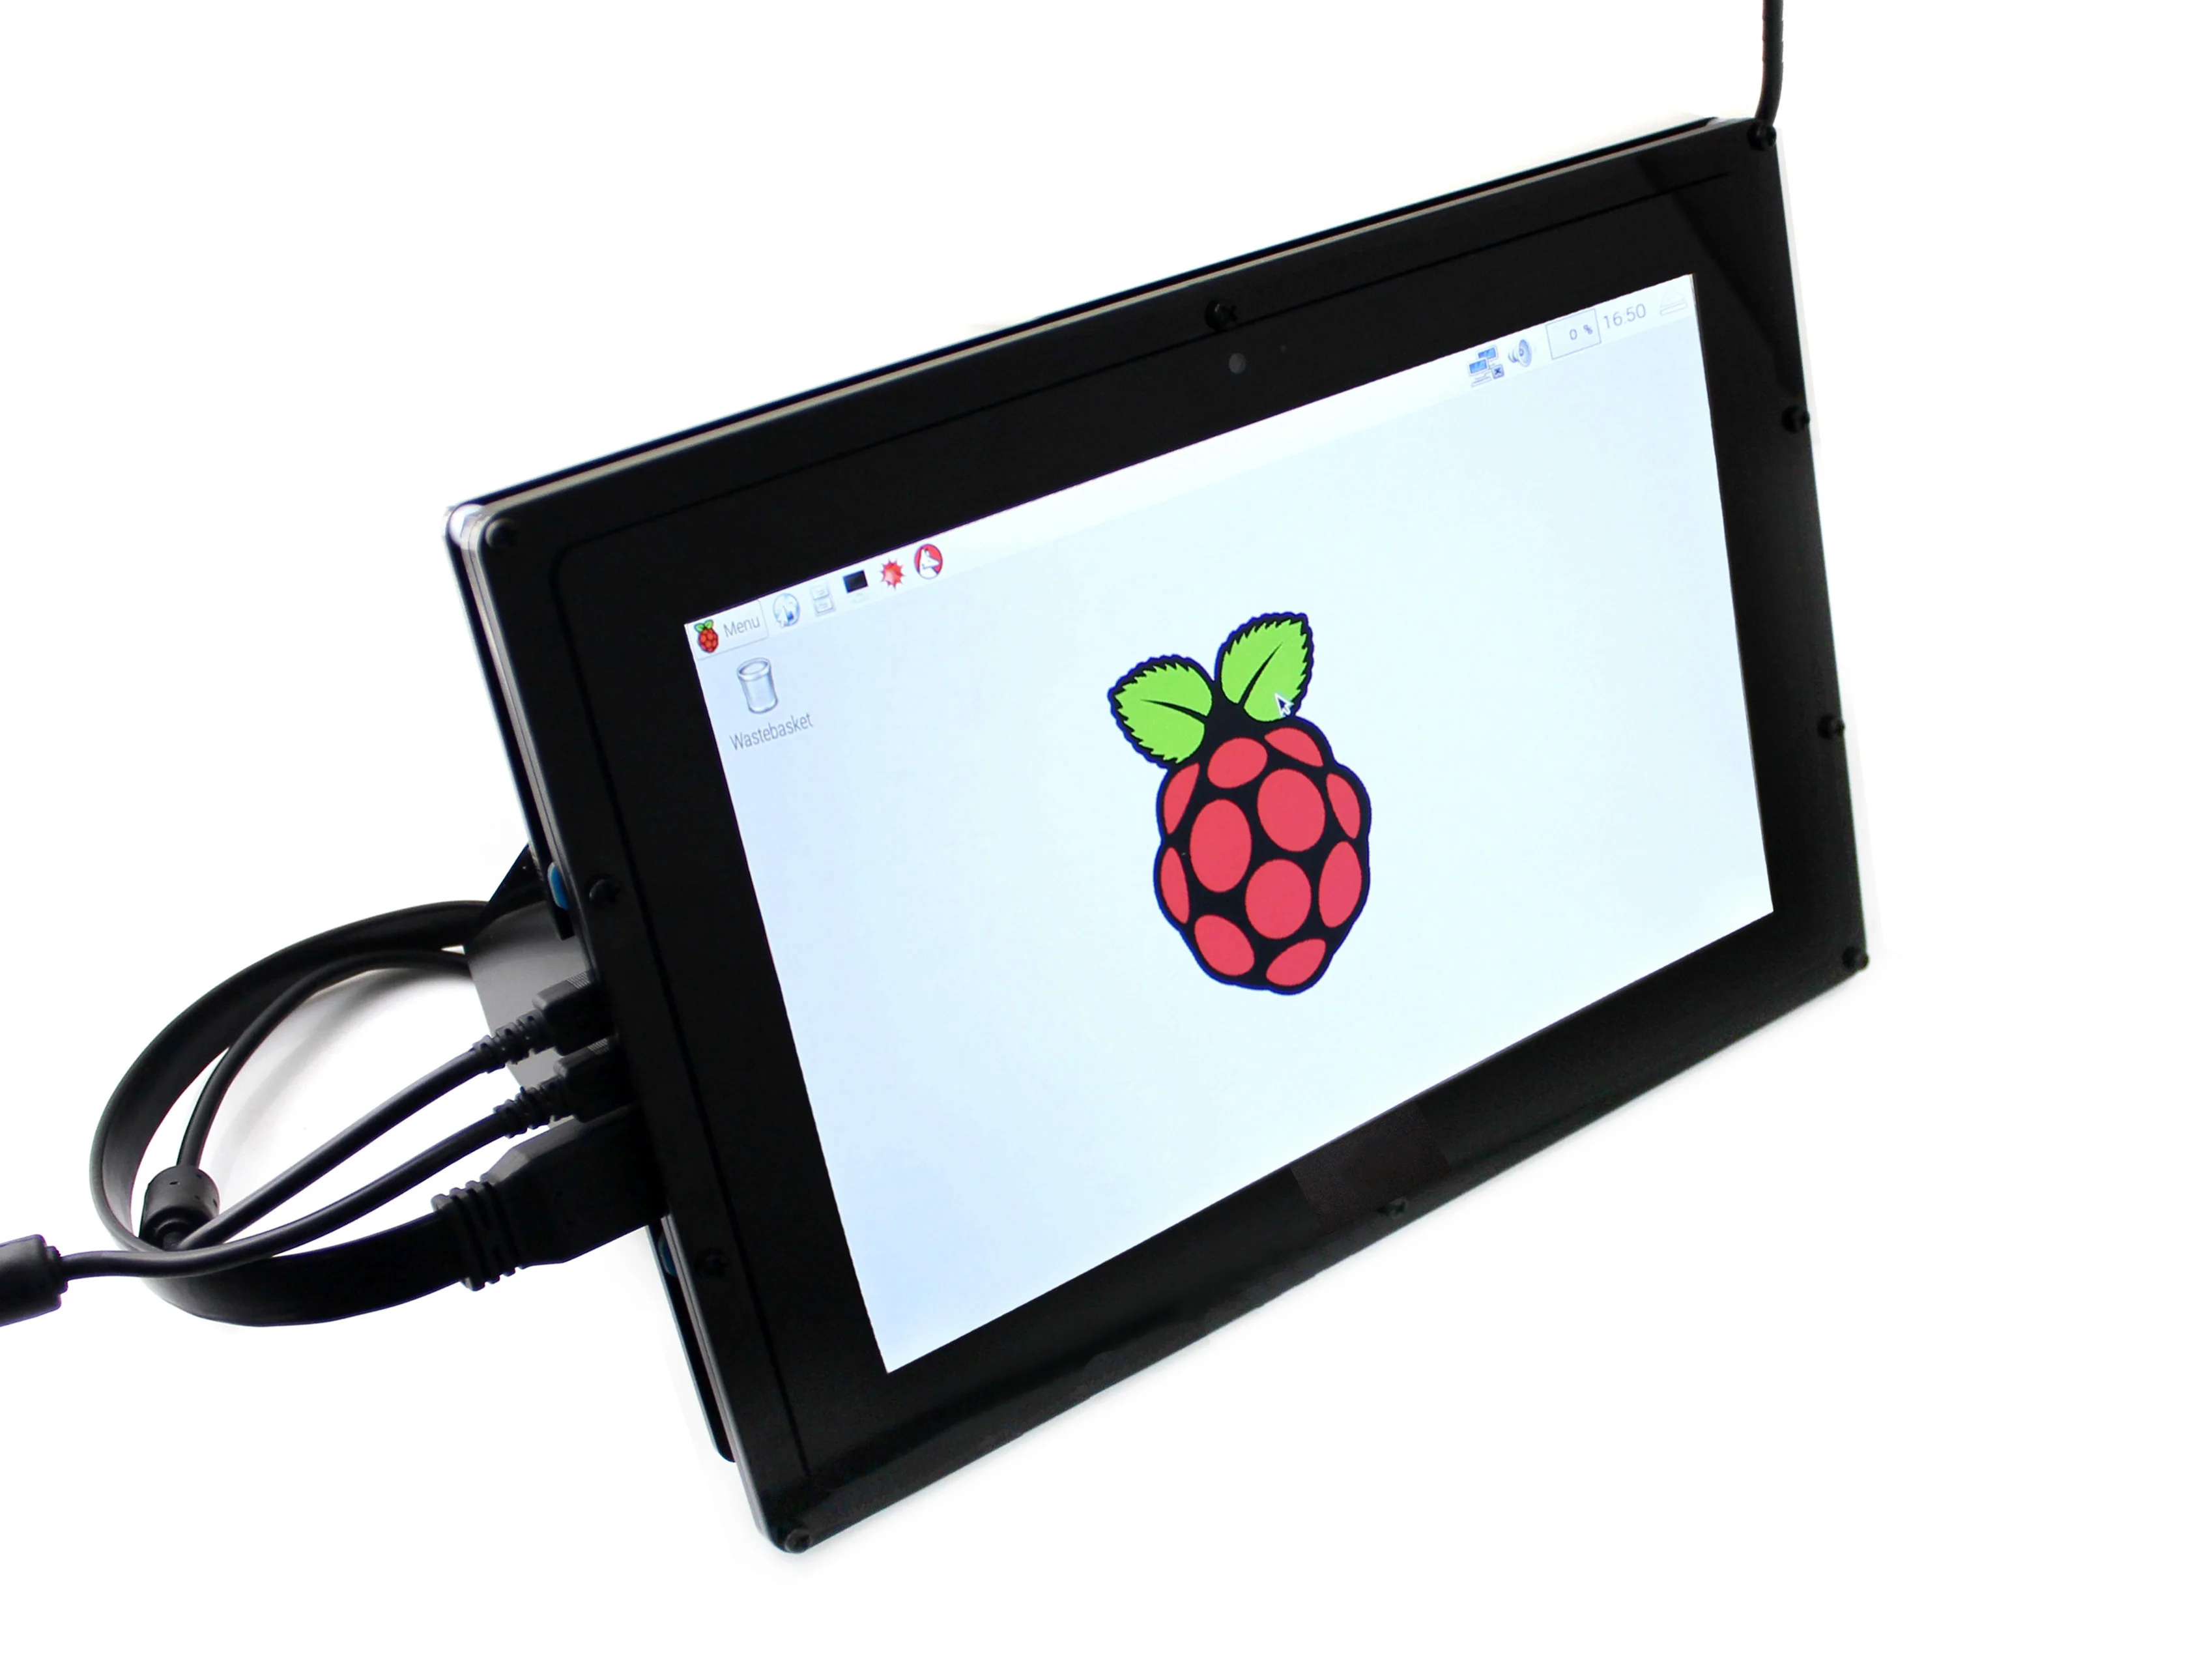 

Waveshare 10.1inch Capacitive Touch Screen LCD (B) with Case 1280×800 HDMI-Compatible IPS display for Raspberry Pi PC Windows 10